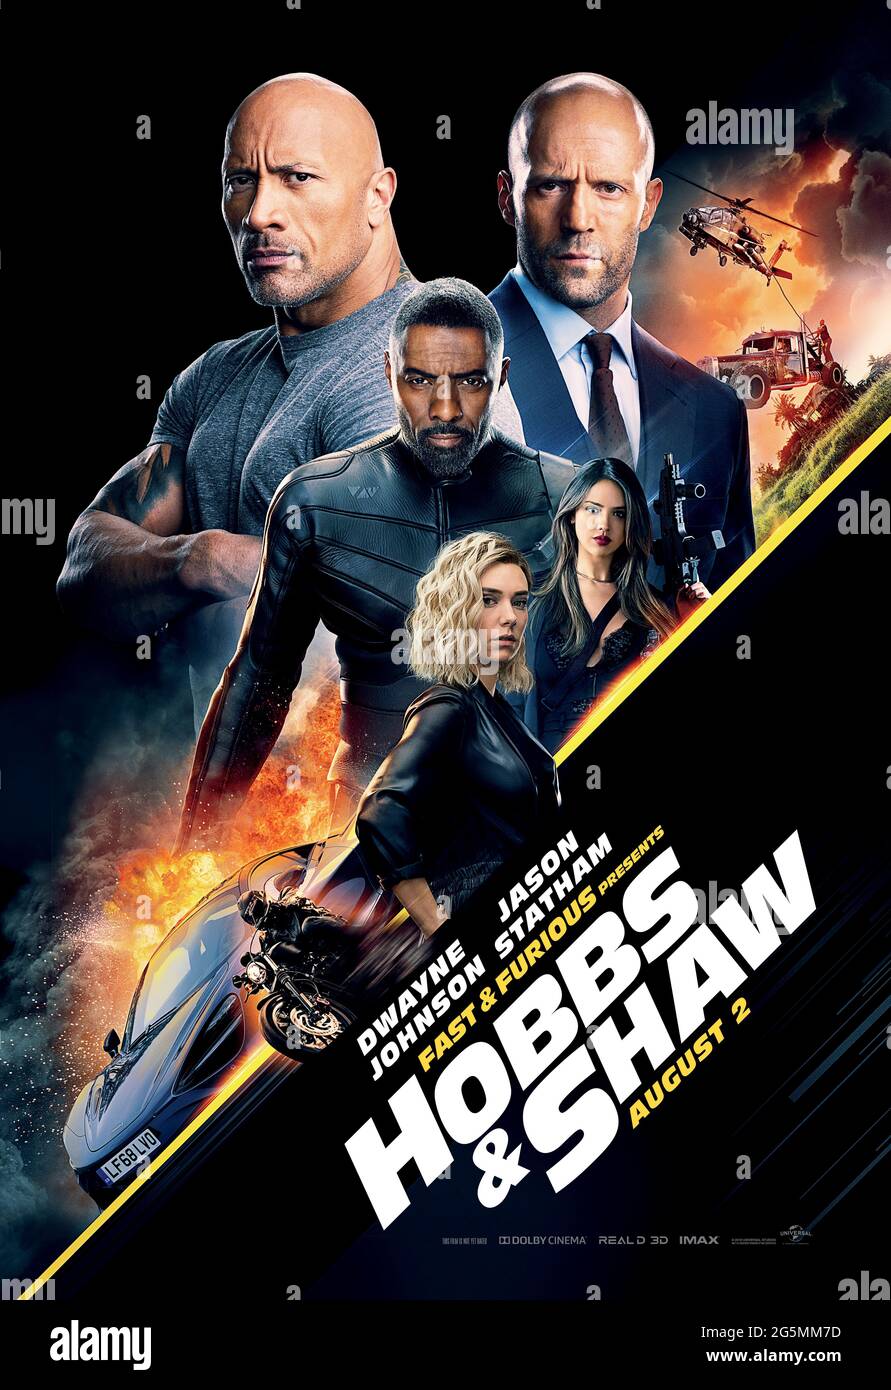 Fast & Furious Presents: Hobbs & Shaw (2019) directed by David Leitch and starring Dwayne Johnson, Jason Statham, Idris Elba and Vanessa Kirby. Spin-off featuring Lawman Luke Hobbs and outcast Deckard Shaw forming an unlikely alliance when a cyber-genetically enhanced villain threatens the future of humanity. Stock Photo